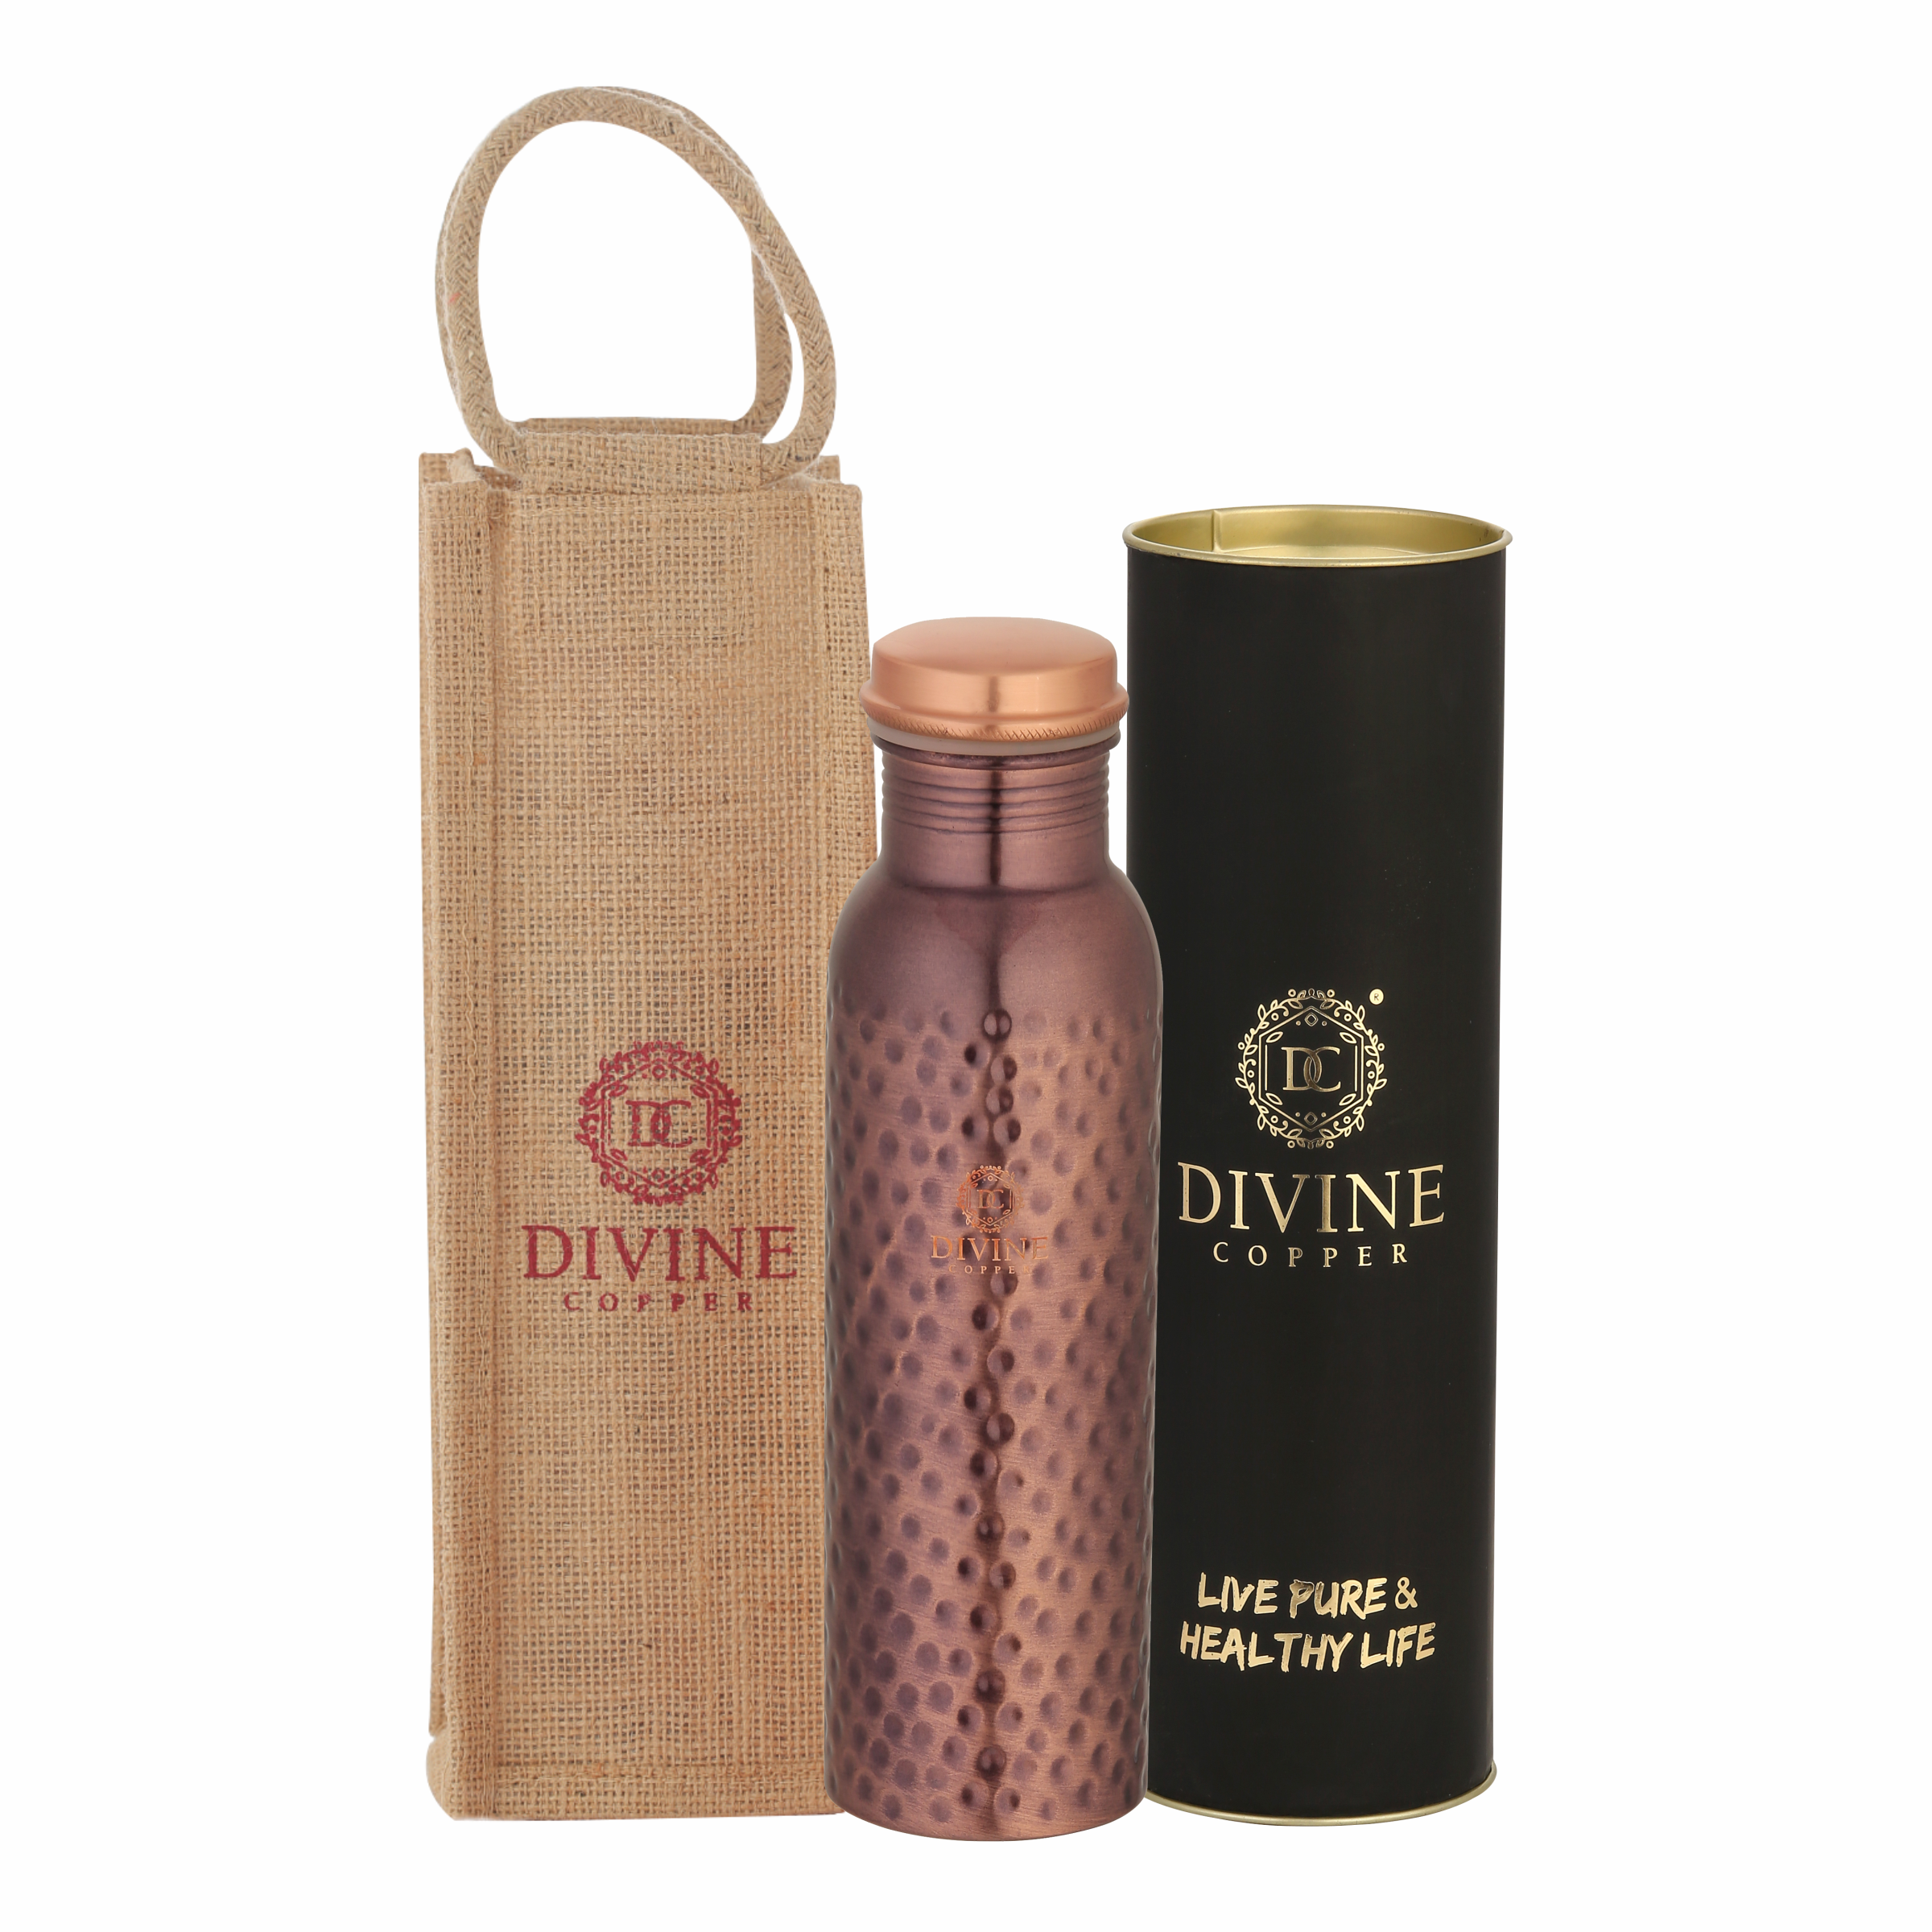 Pie antique hammered 950ml Pure copper bottle with Free Jute carry bag